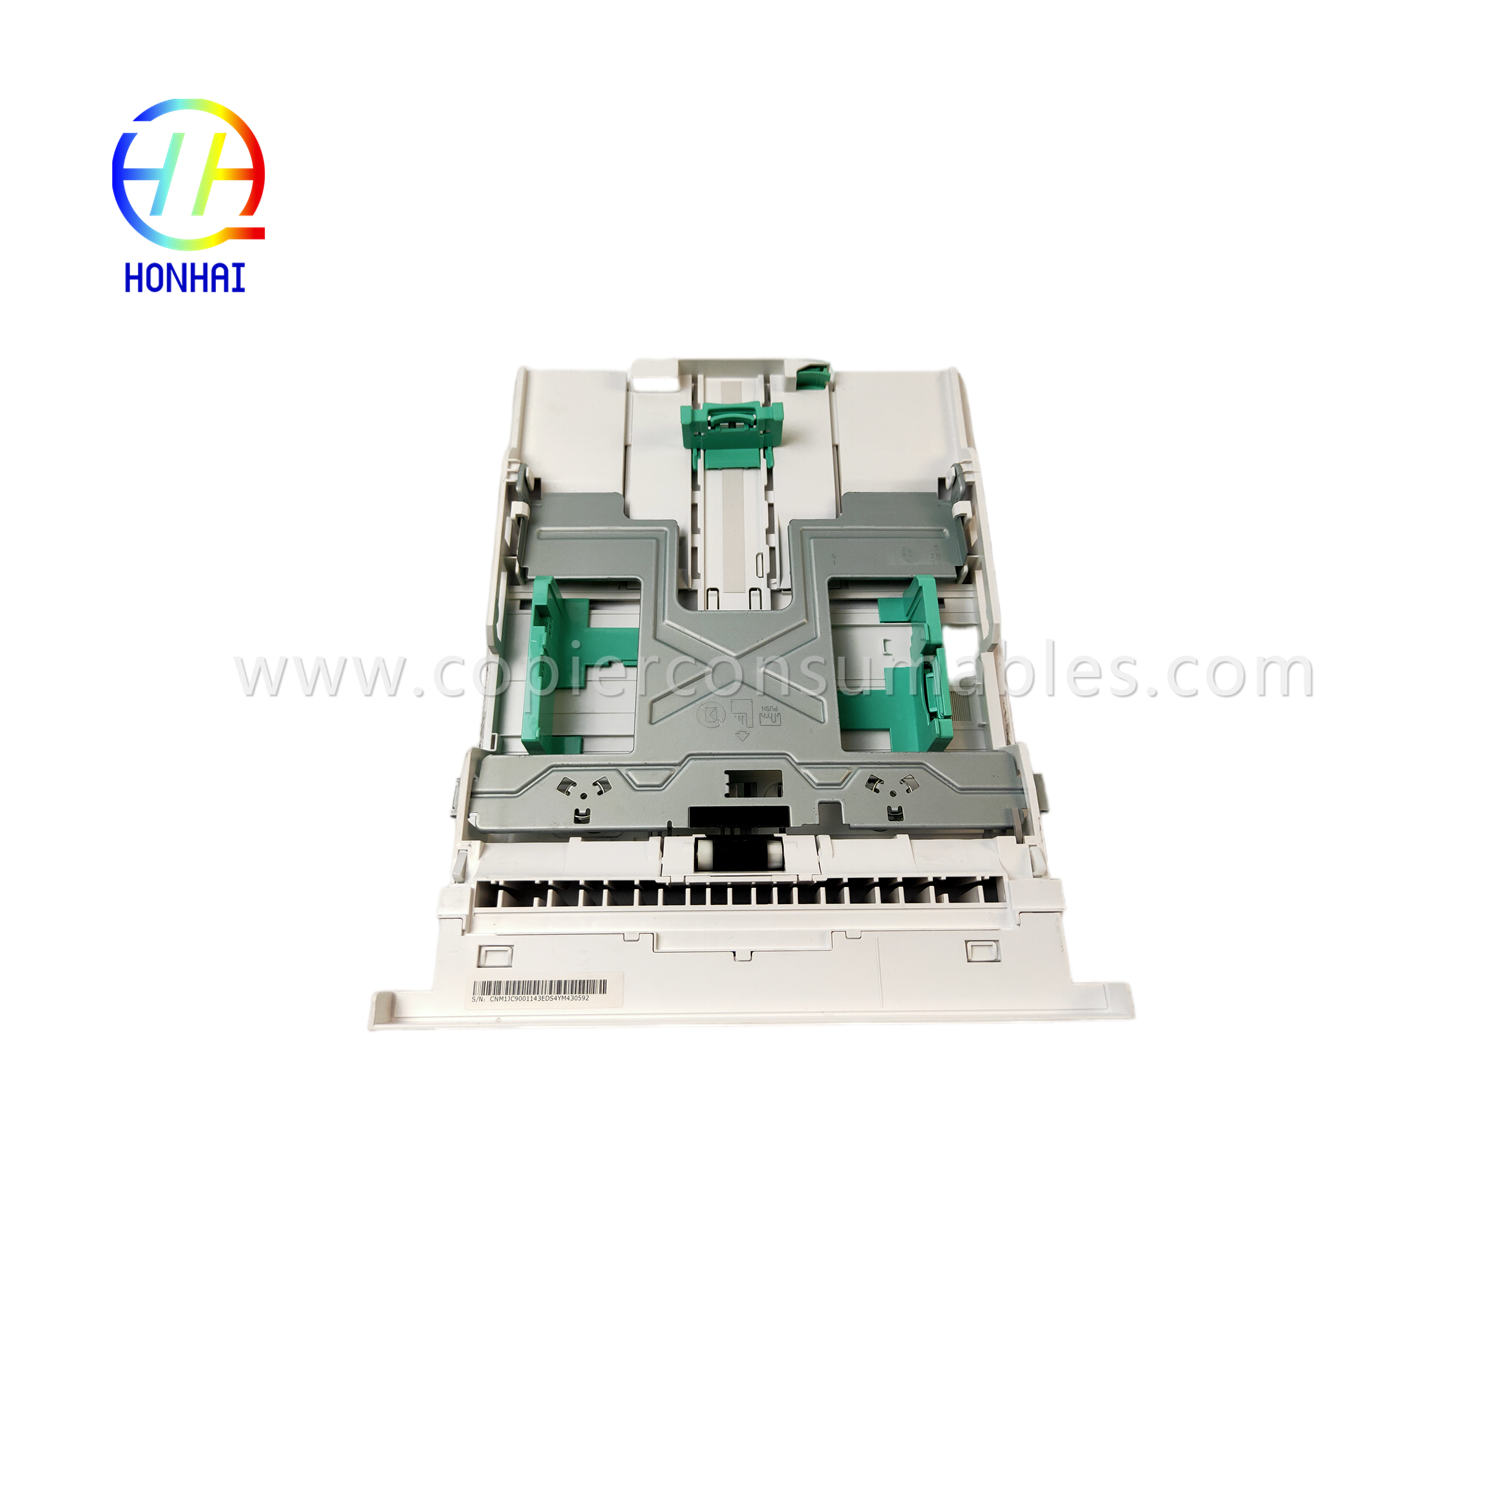 https://c585.goodao.net/paper-tray-assembly-for-xerox-phaser-3320dni-workcentre-3315dn-3325dni-050n00650-cassette-paper-tray-product/